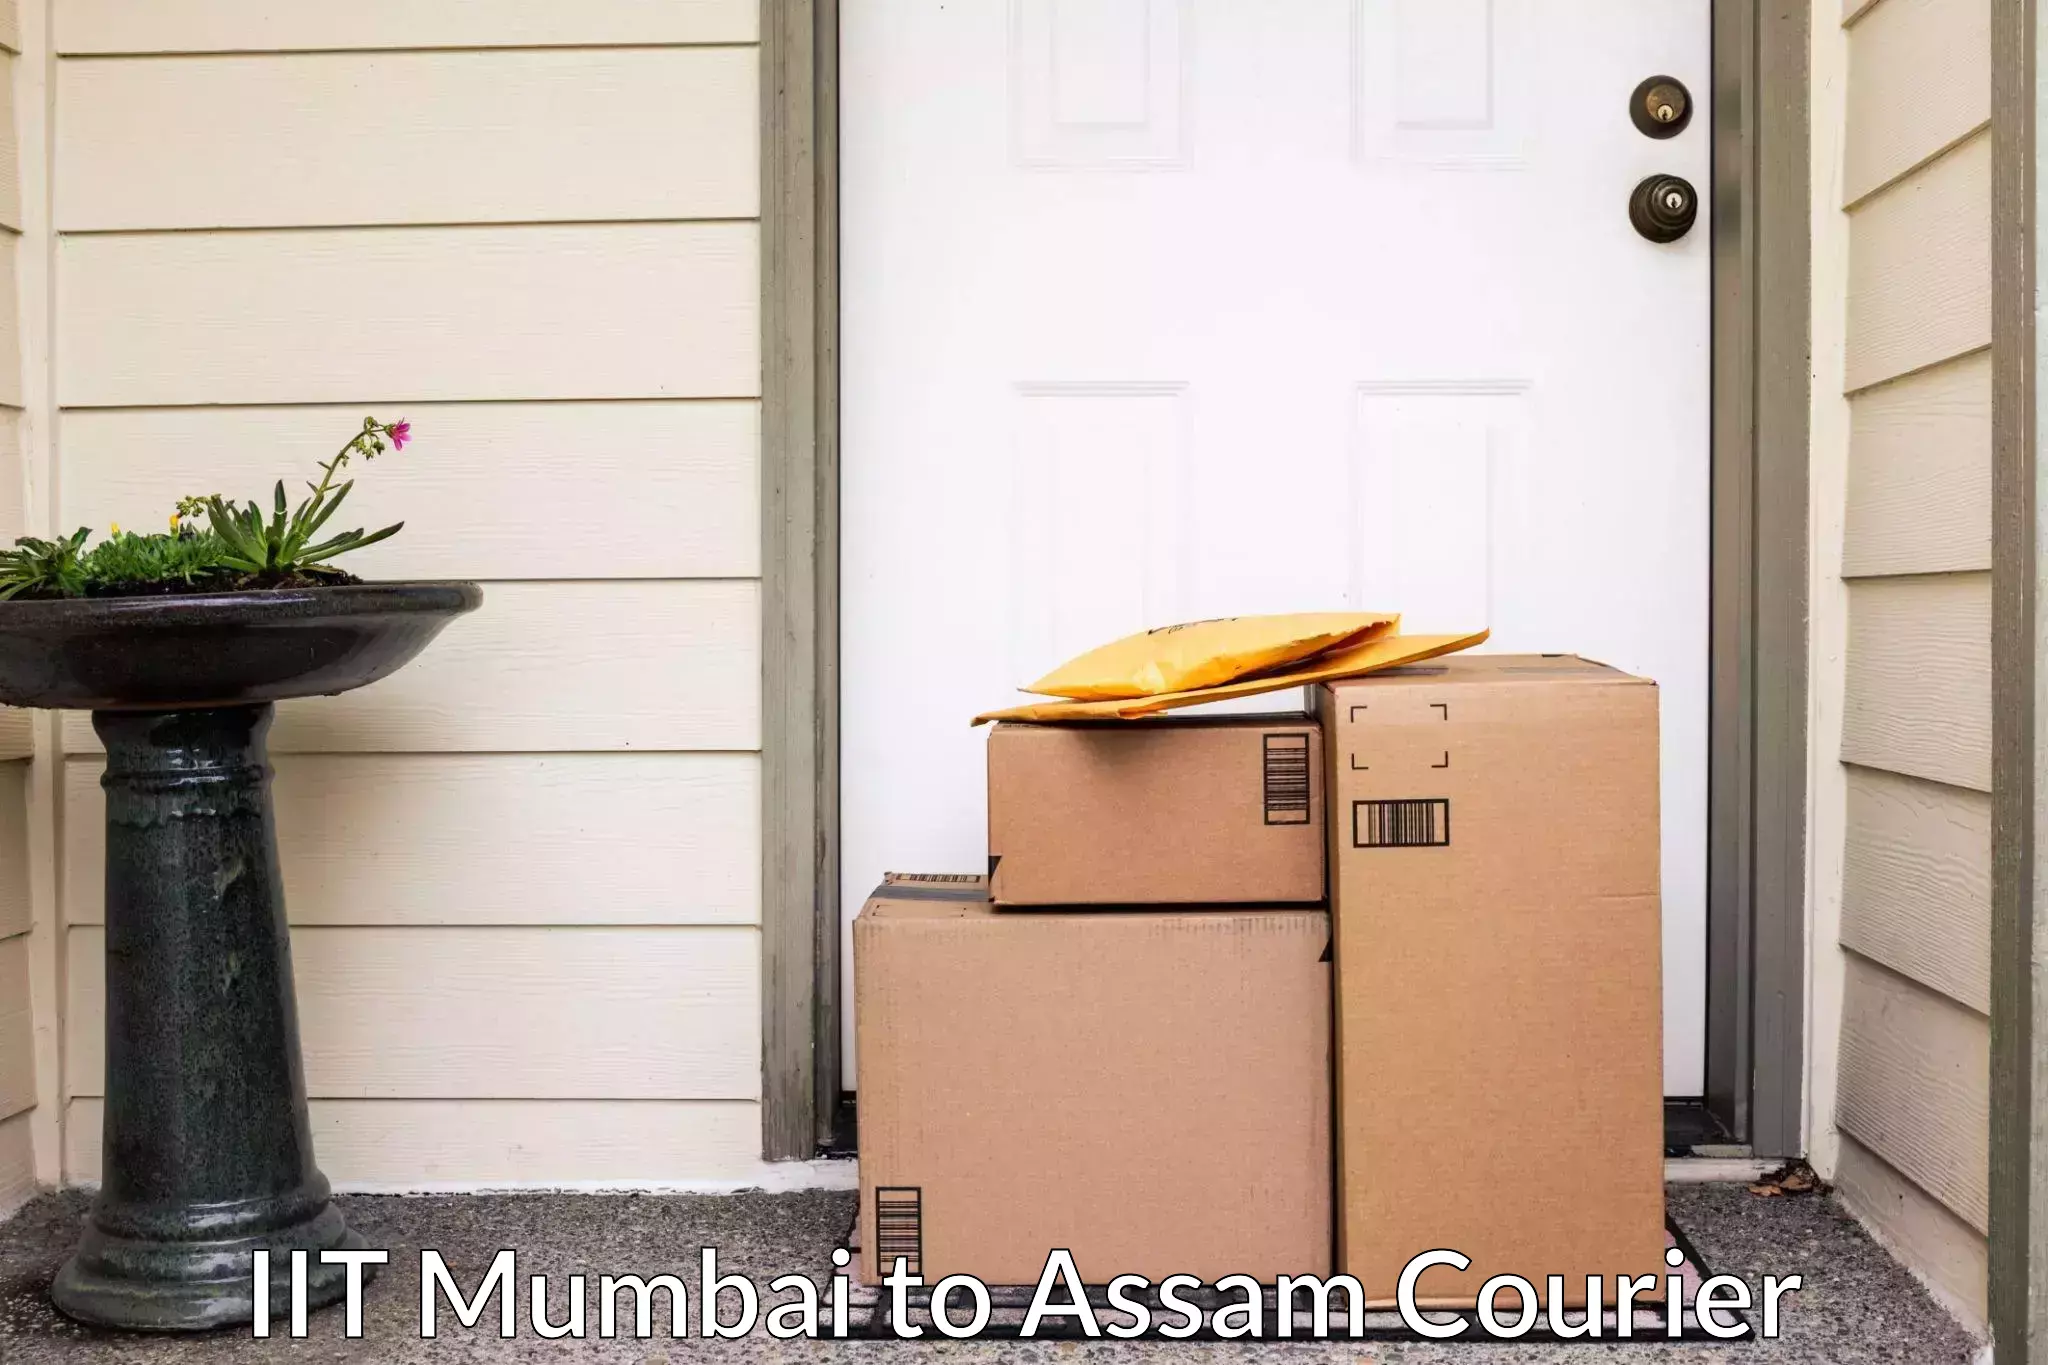 Reliable relocation services IIT Mumbai to Udharbond